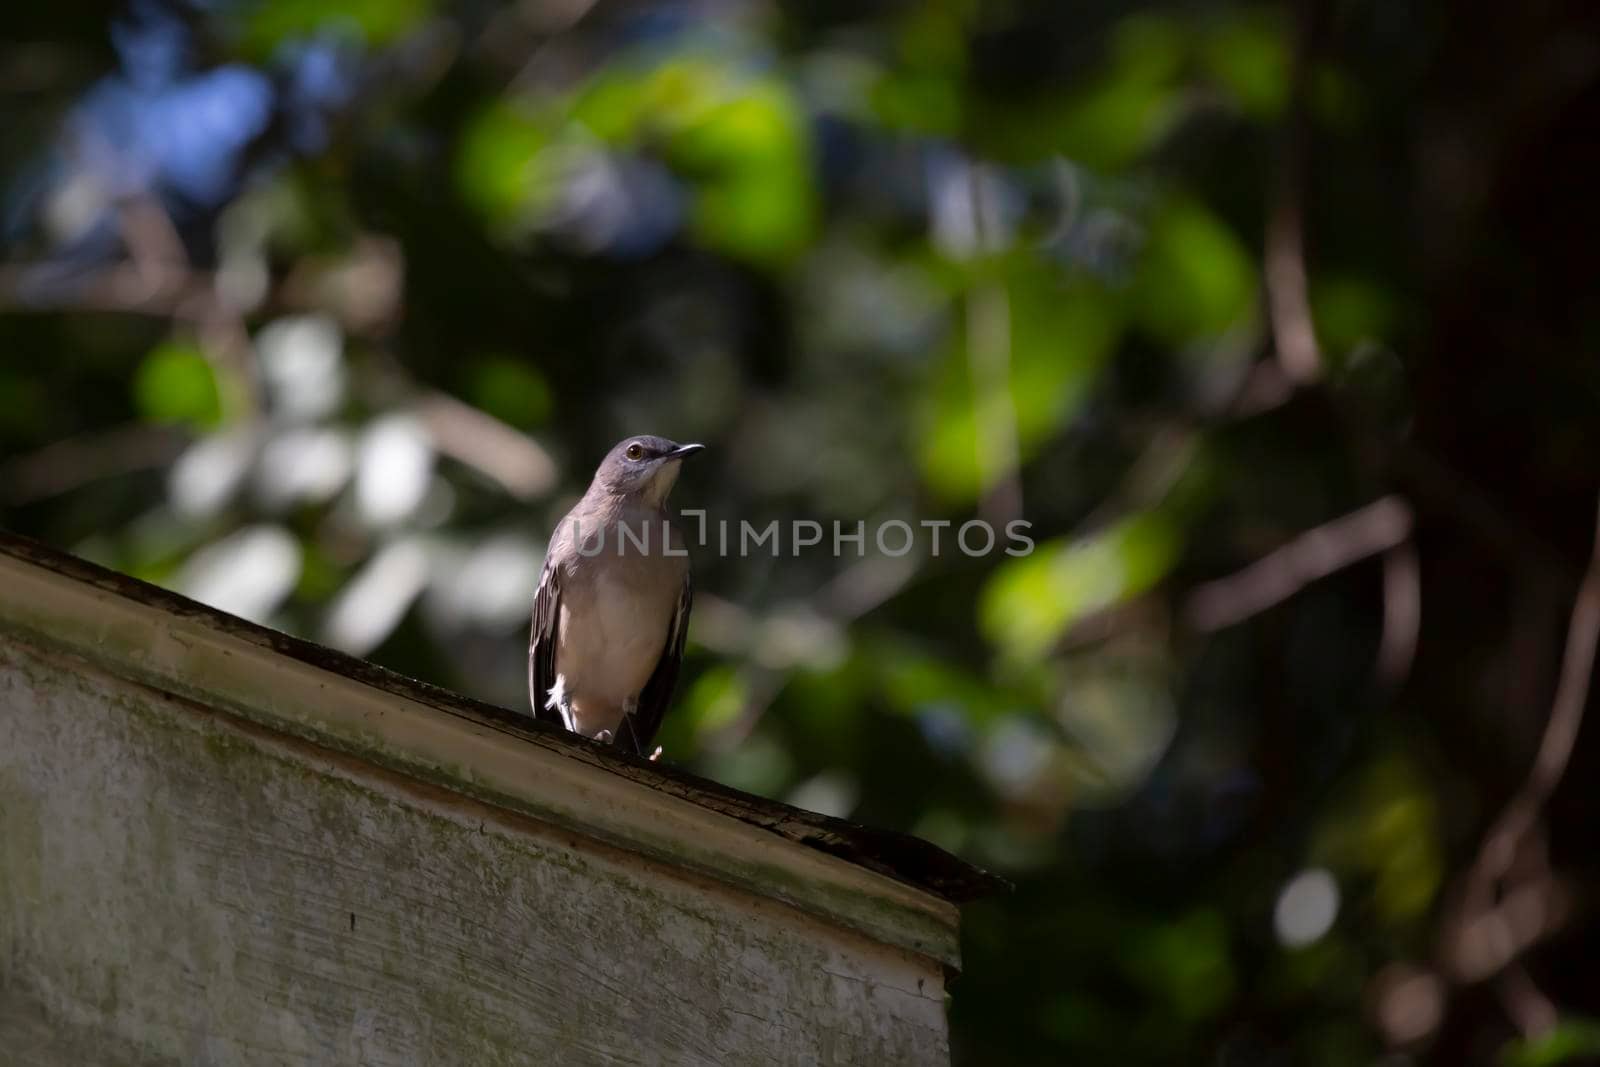 Curious nothern mockingbird (Mimus poslyglotto) looking out from its perch on a roof